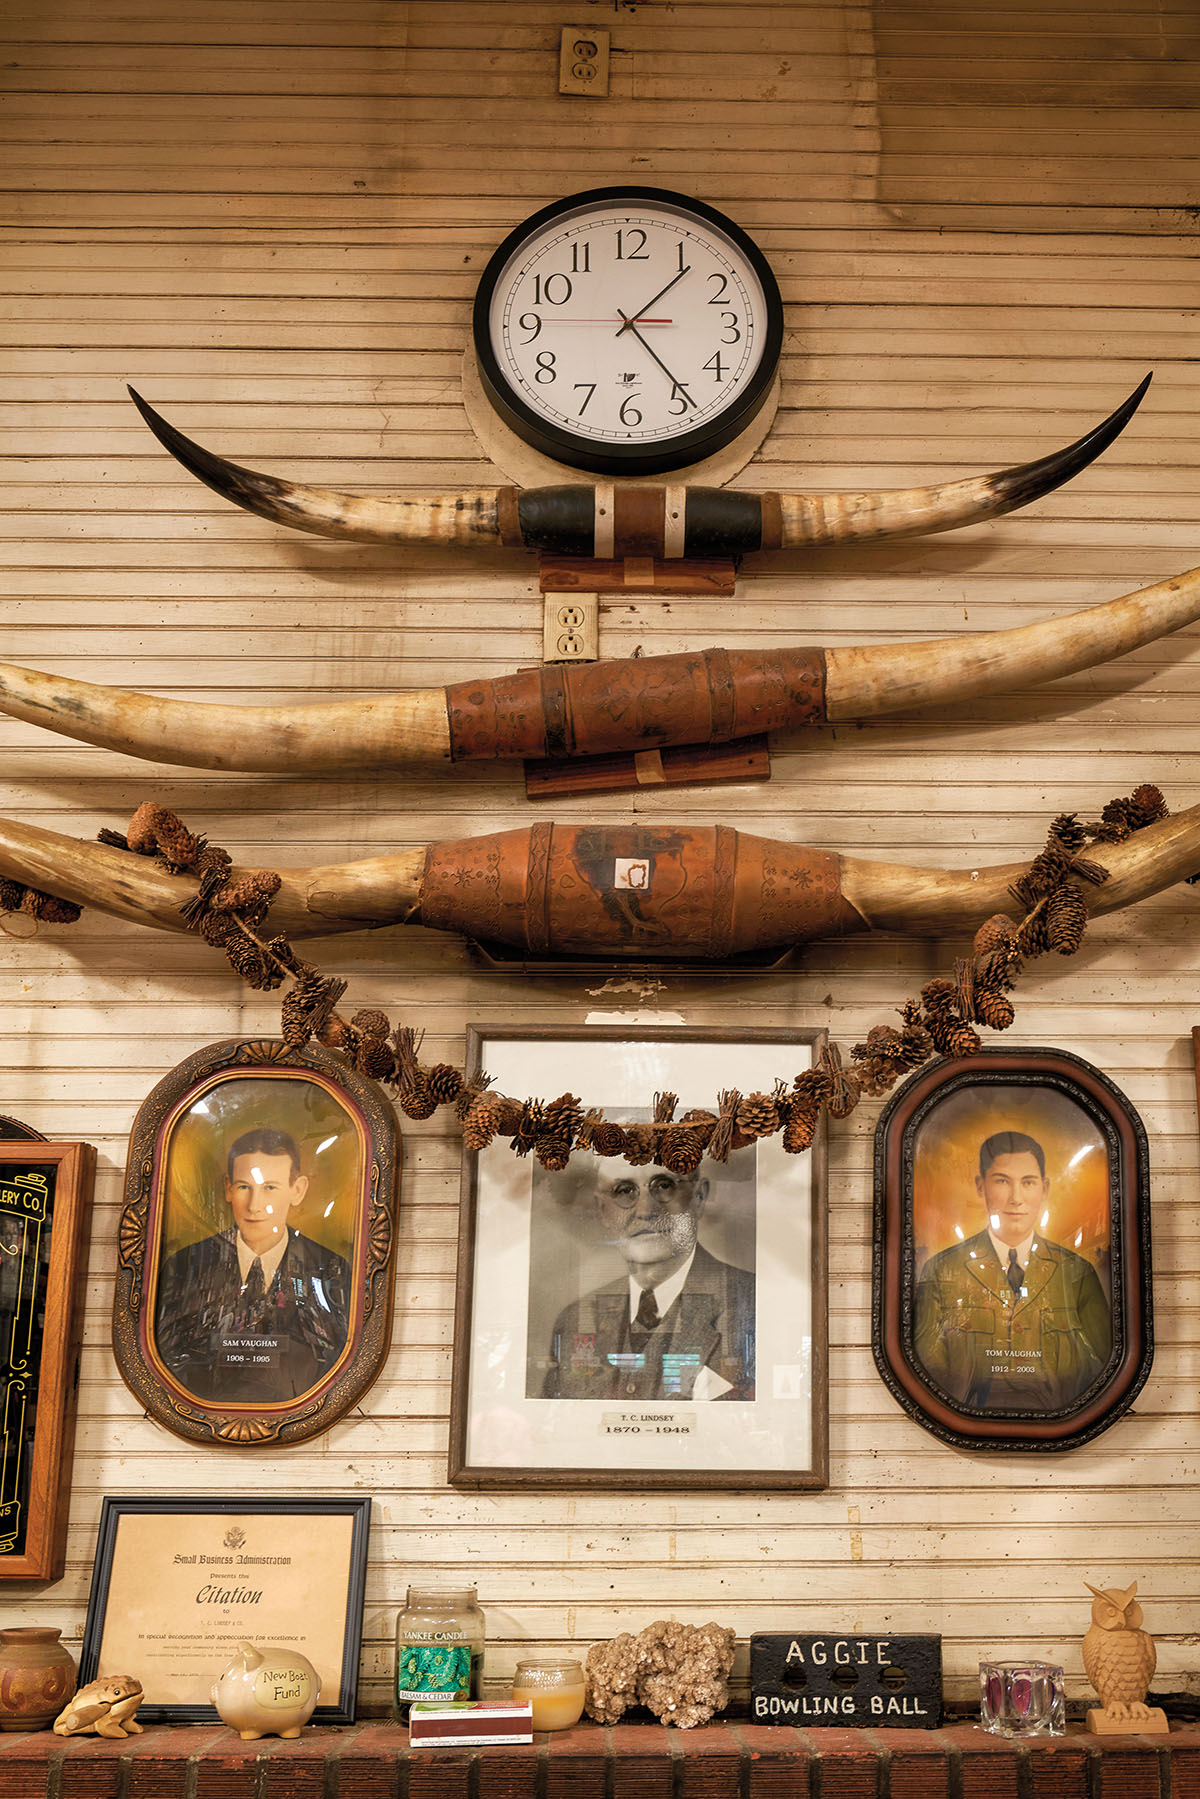 Cow horns, a clock, and vintage photographs adorn a wood-paneled wall